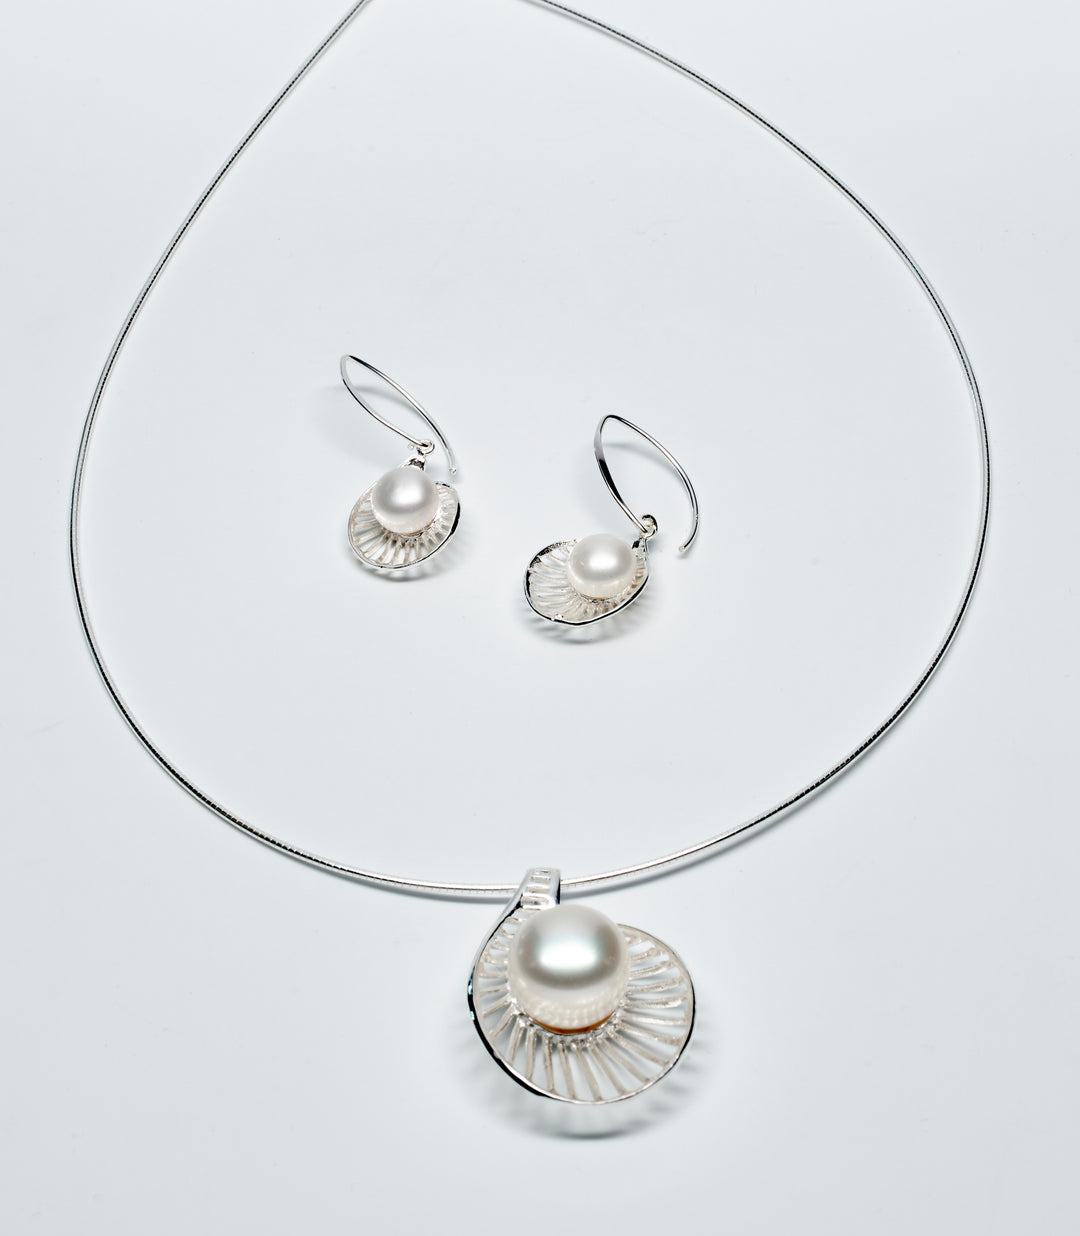 Silver Oyster Shaped Pearl Earrings and Pendant